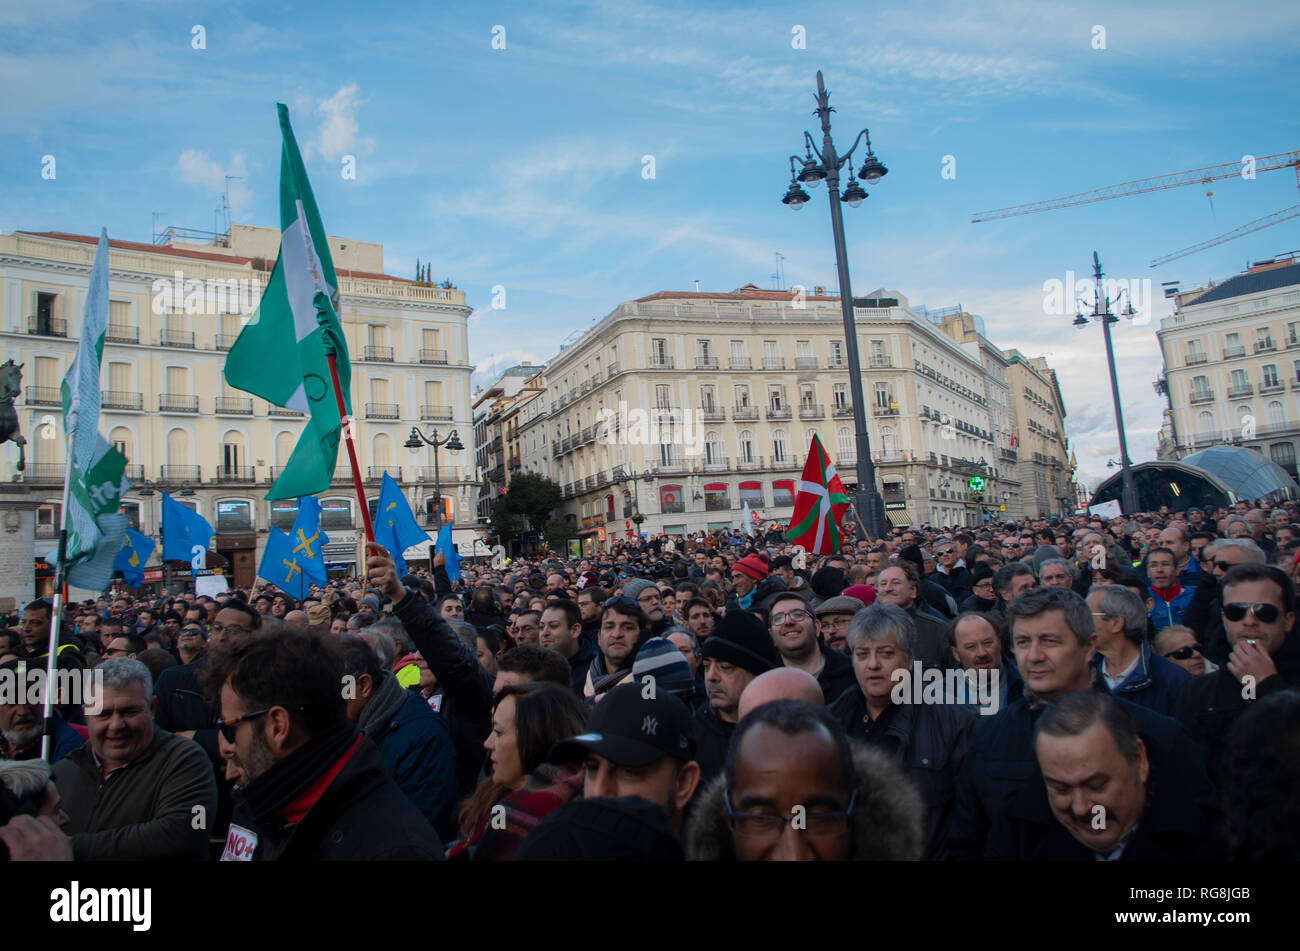 Madrid, Spain. 28th January 2019. Taxi drivers in Madrid have been on a strike for more than a week demanding the prohibition of Uber and Cabify in the Spanish capital-city.   Due to a lack of agreement, hundreds of taxi drivers protested at Puerta del Sol, Madrid’s central square. Credit: Lora Grigorova/Alamy Live News Stock Photo